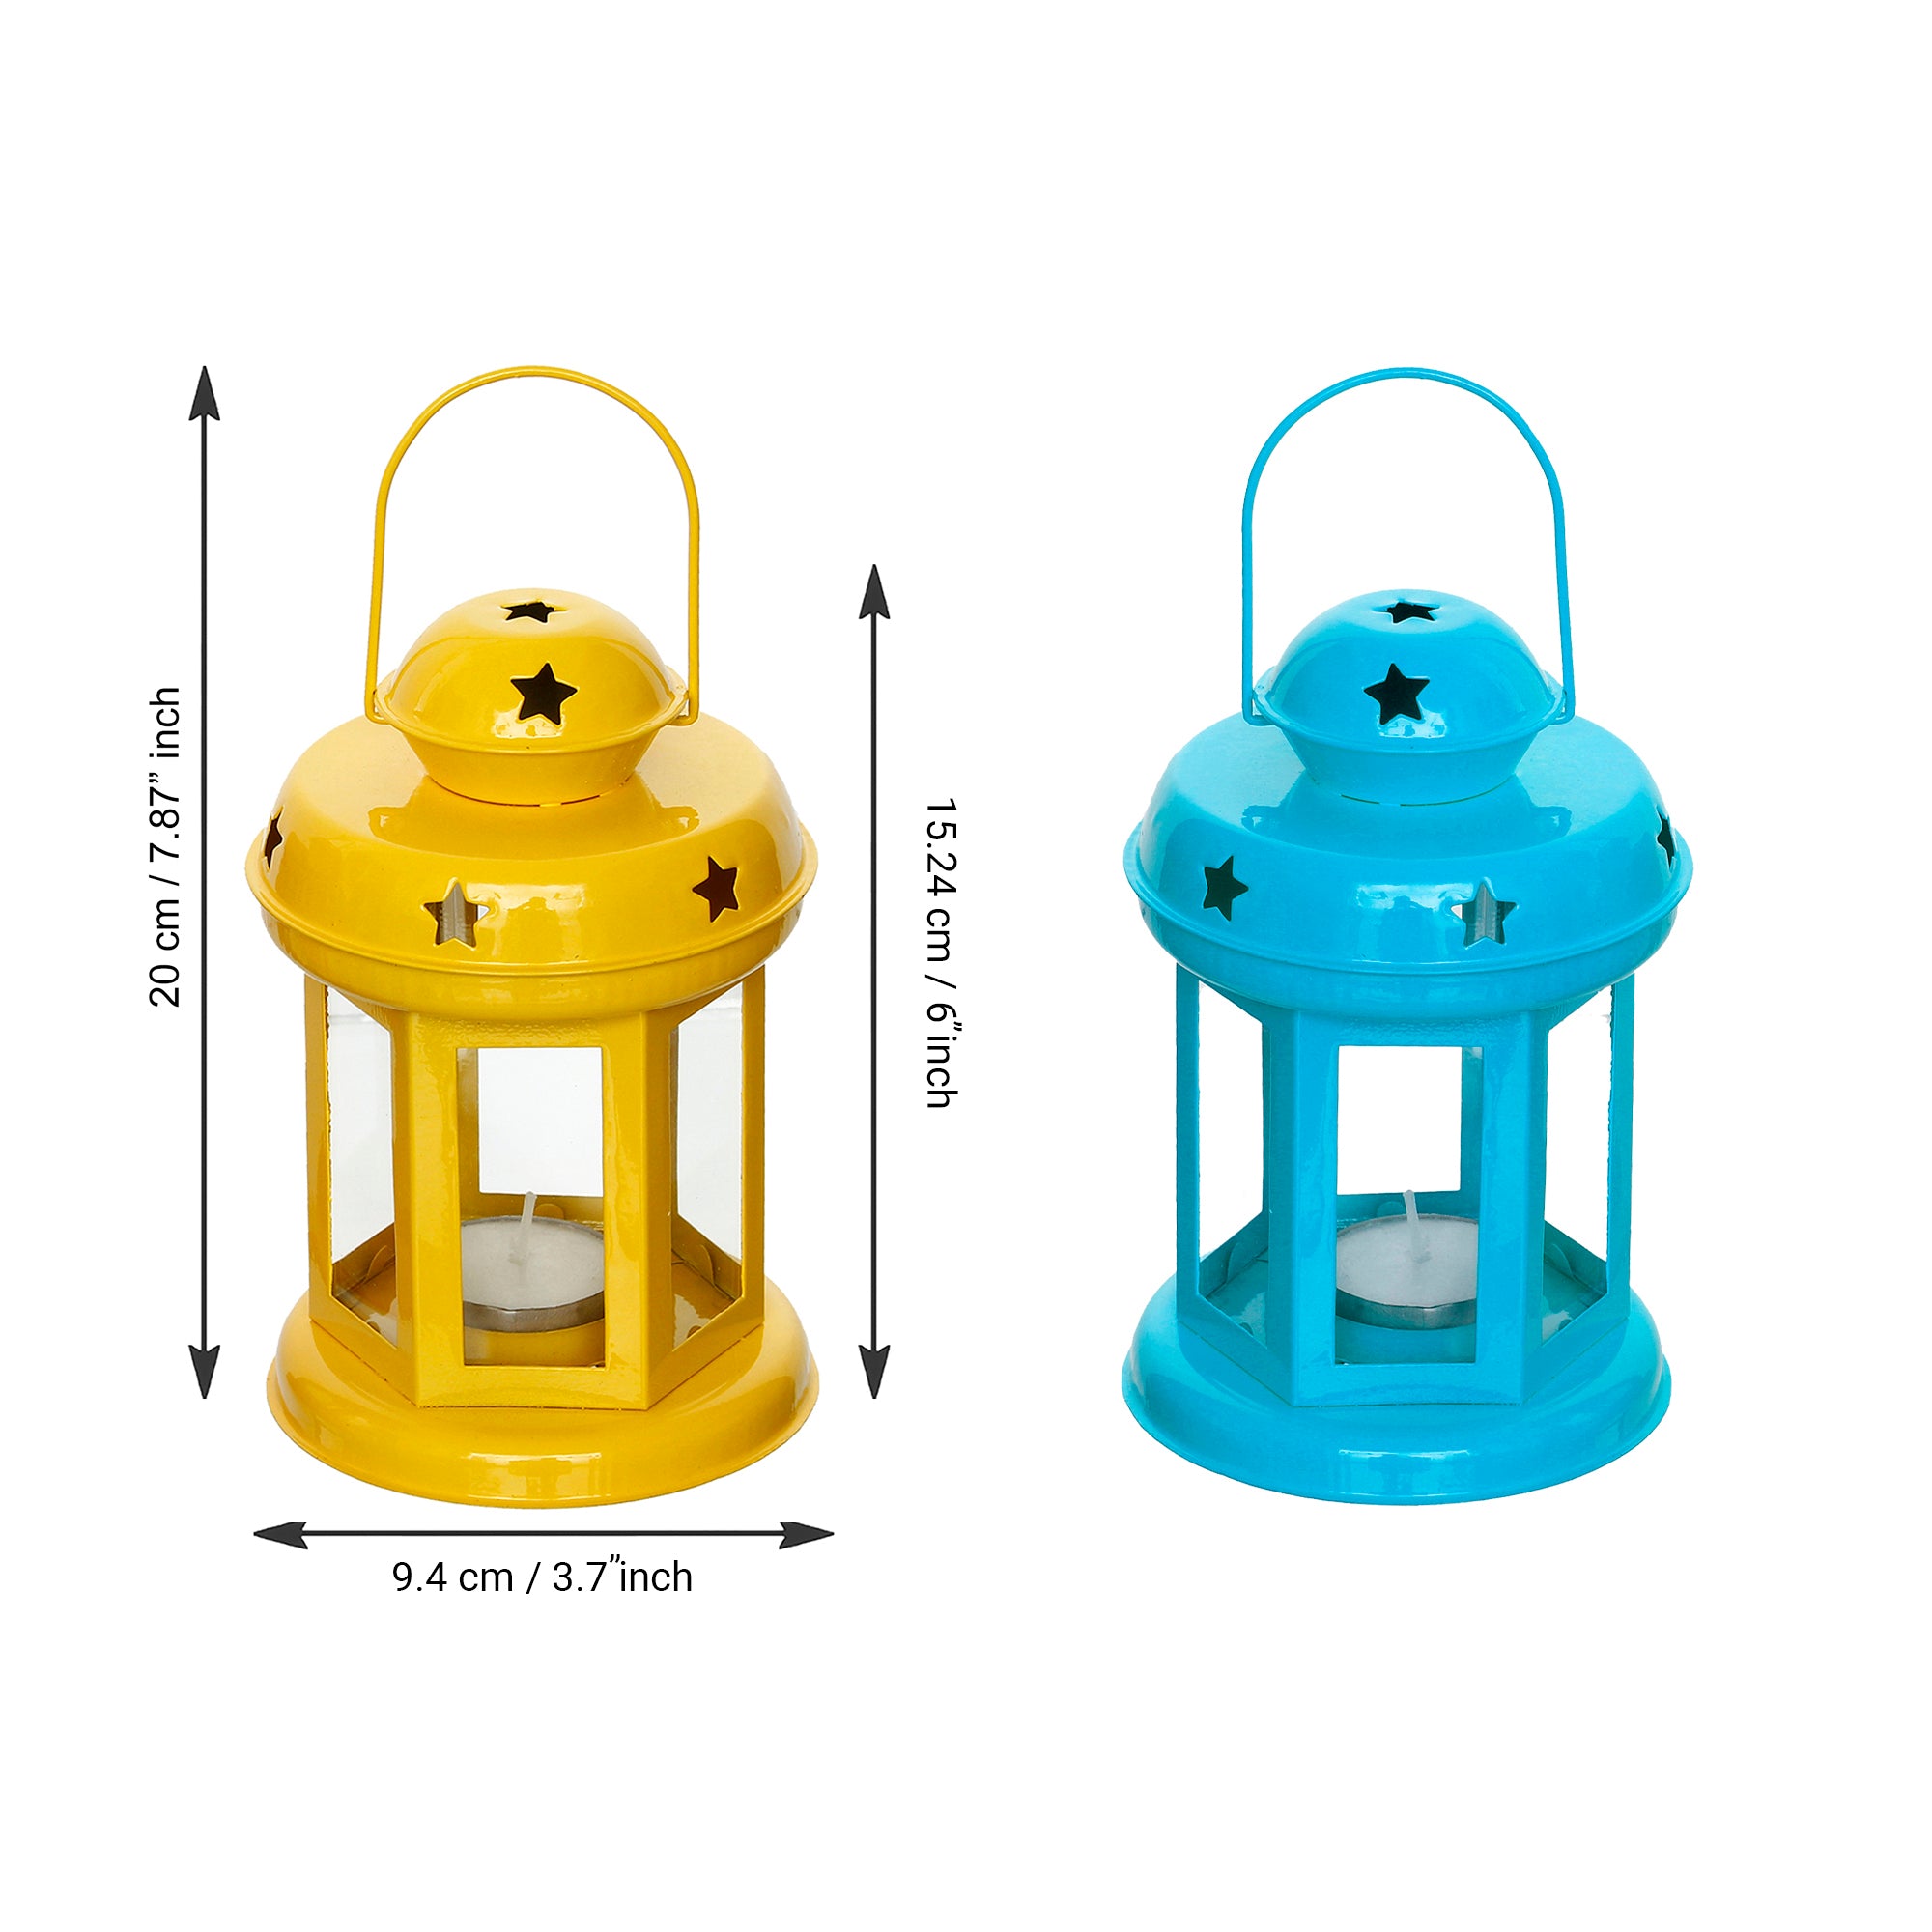 Set of 2 Blue and Yellow Metal hanging Tea Light Candle Holder Lantern with Tealight Candle 3